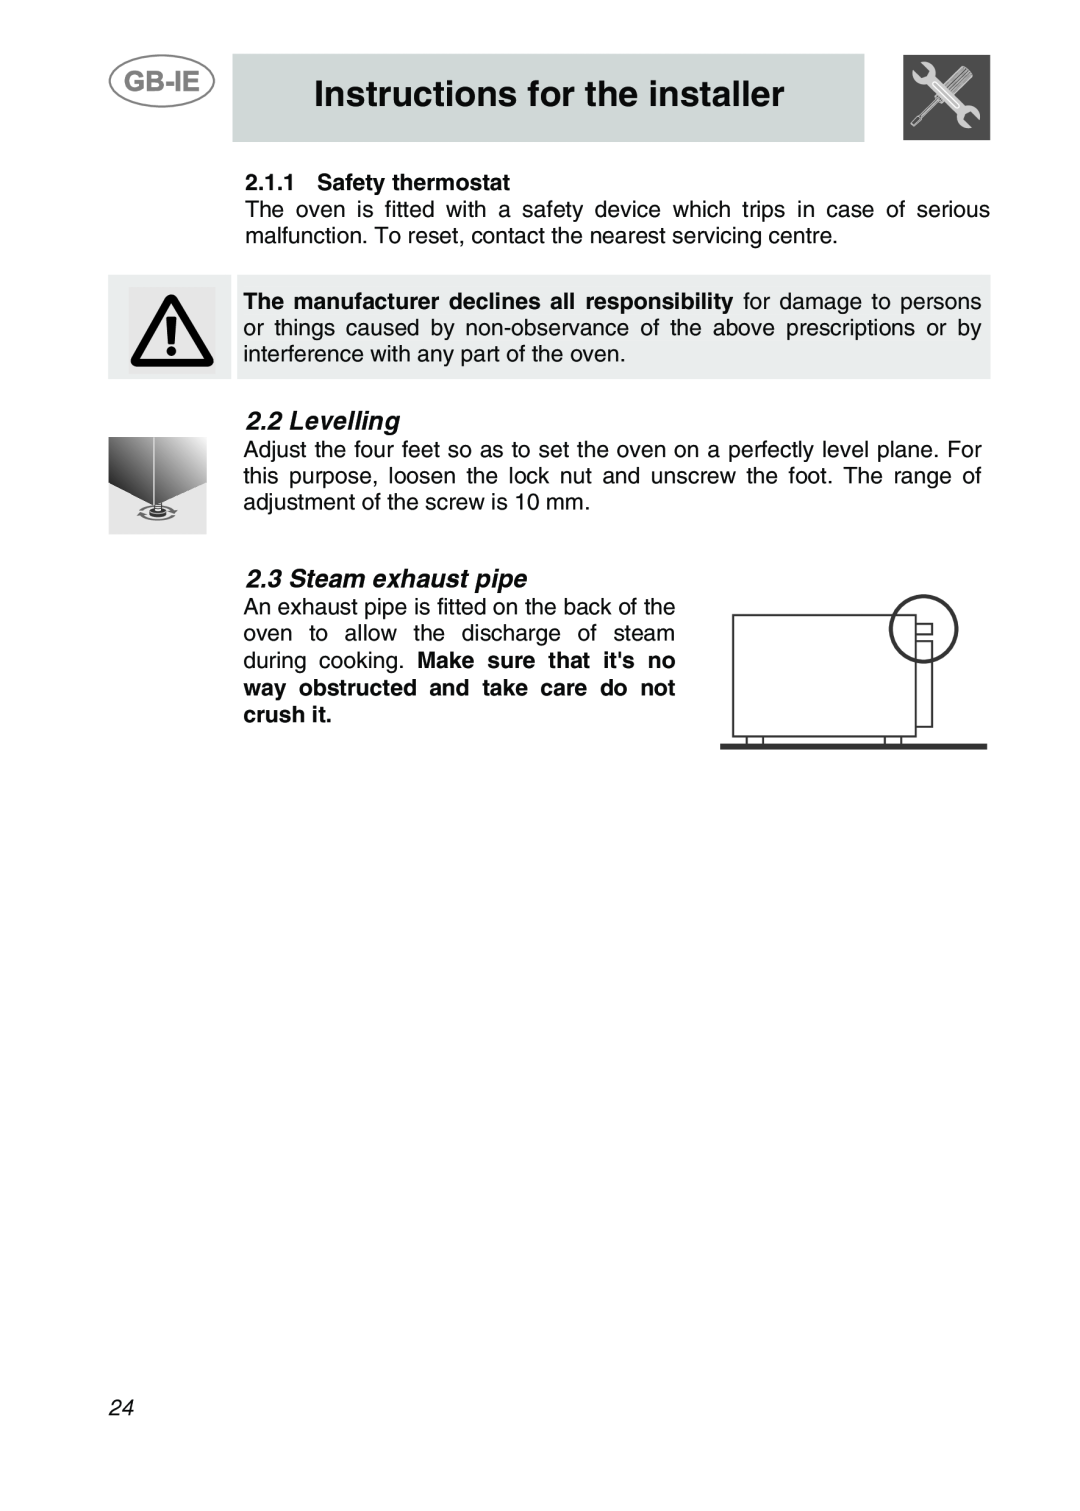 Smeg ALFA135BM manual Levelling, Steam exhaust pipe, Instructions for the installer, Safety thermostat 